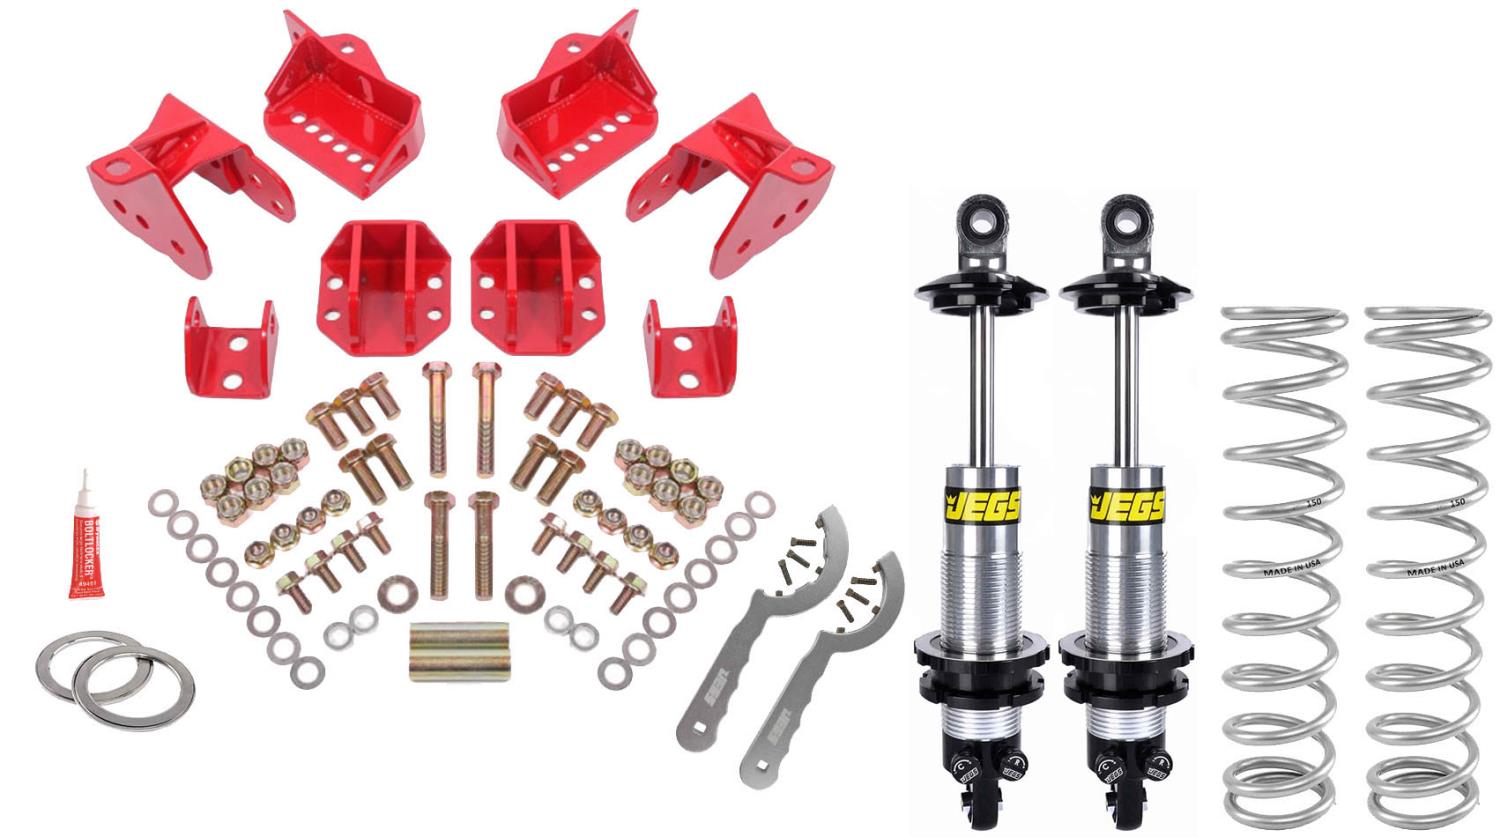 Rear Coil-Over Conversion Kit w/ Lower Control Arm Brackets, Double-Adjustable Shocks, 1964-72 GM A-Body - Red Powder-Coated